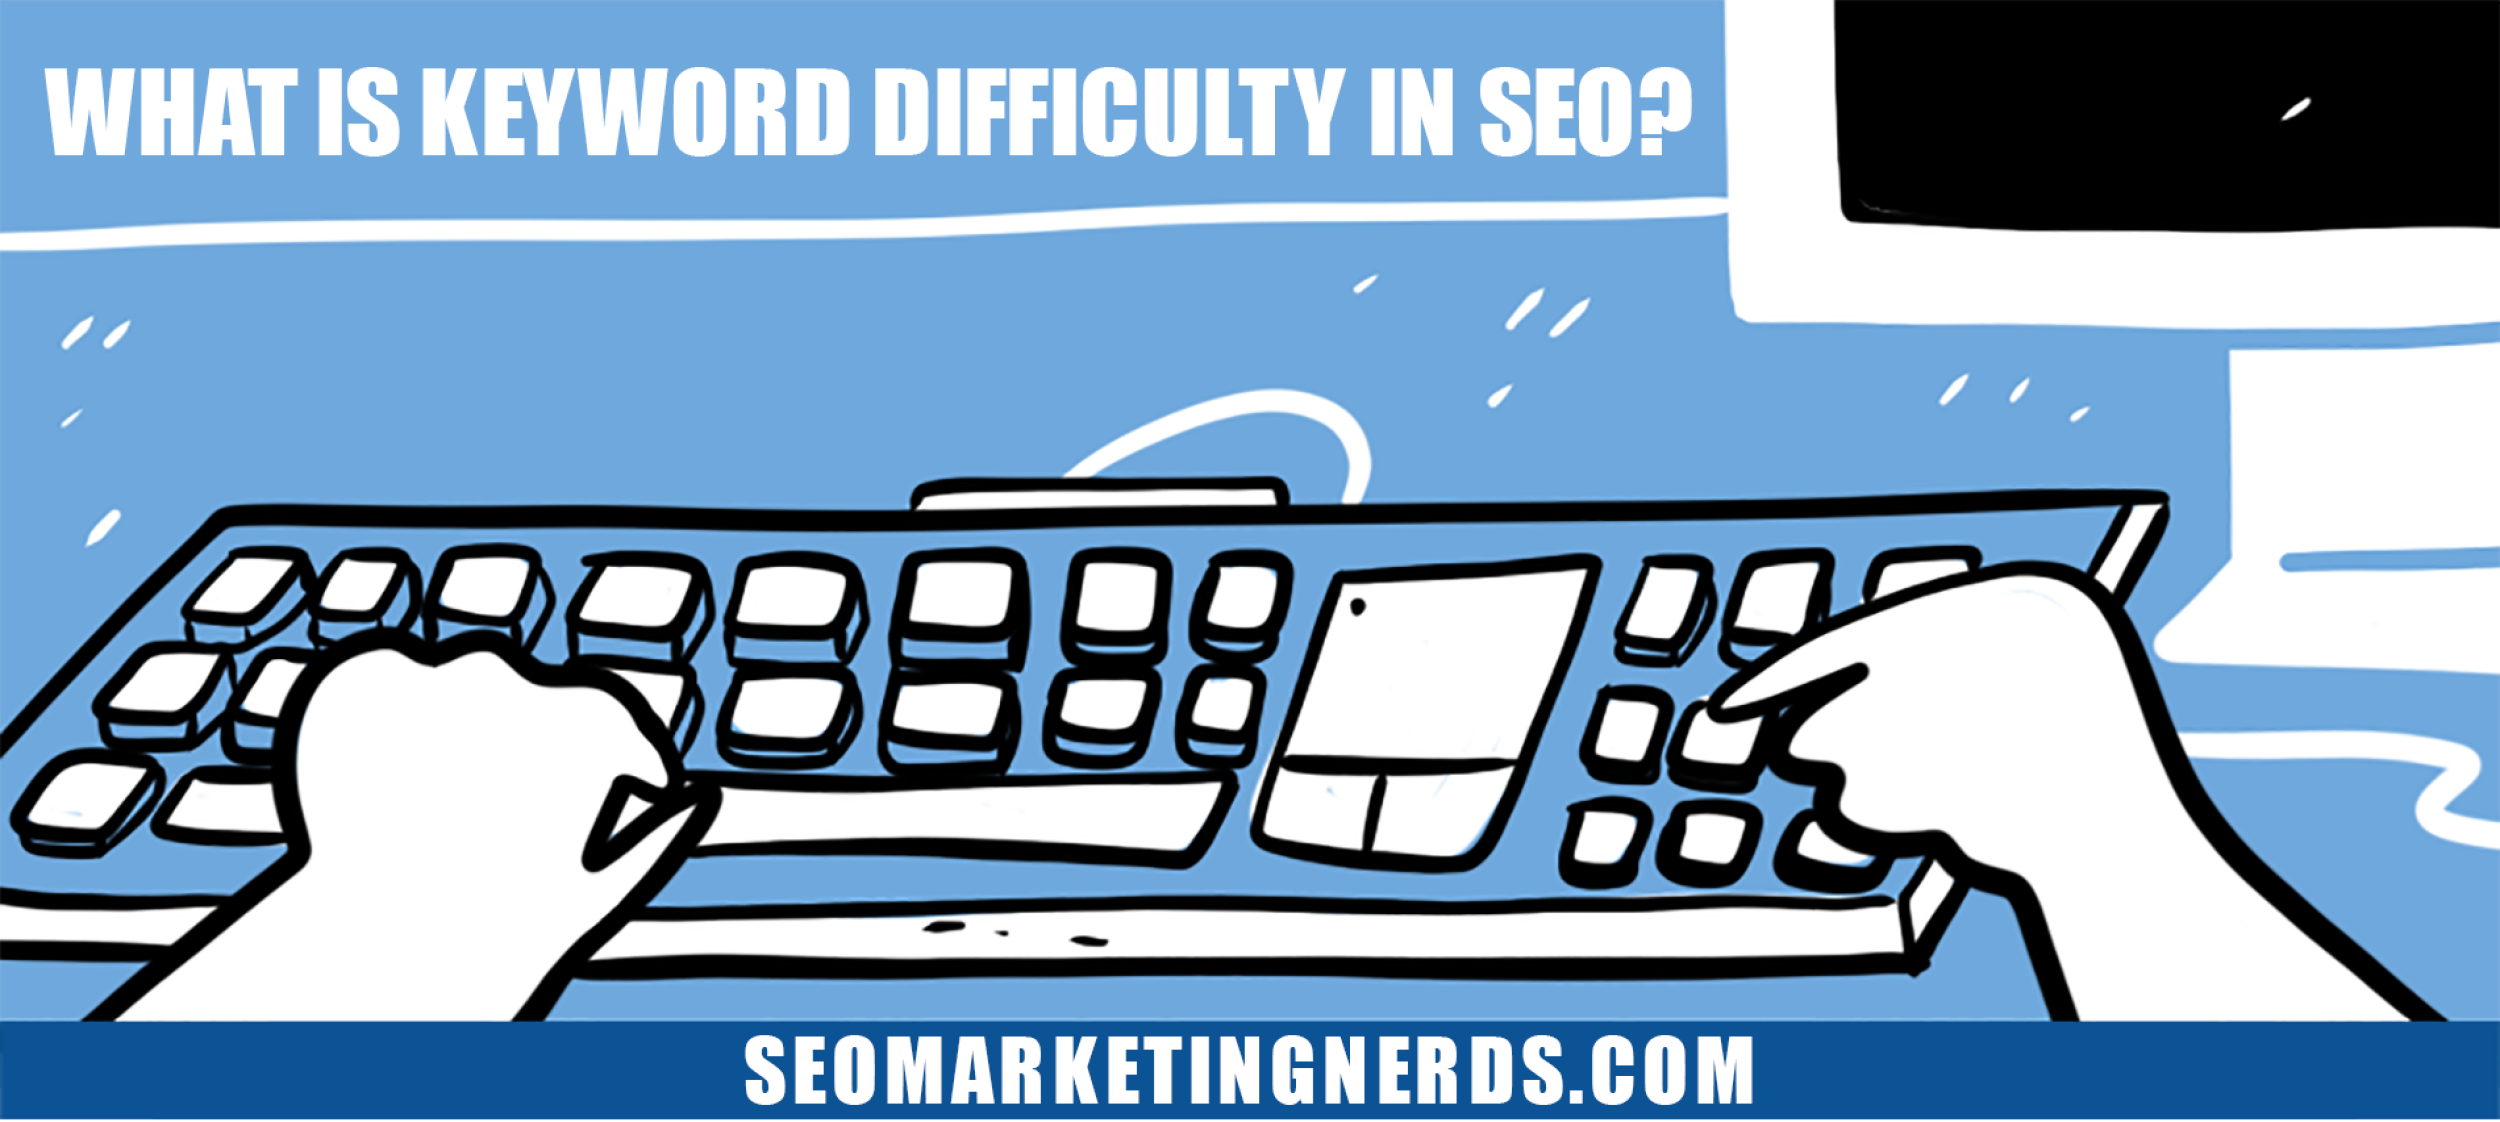 What is keyword difficulty in SEO?